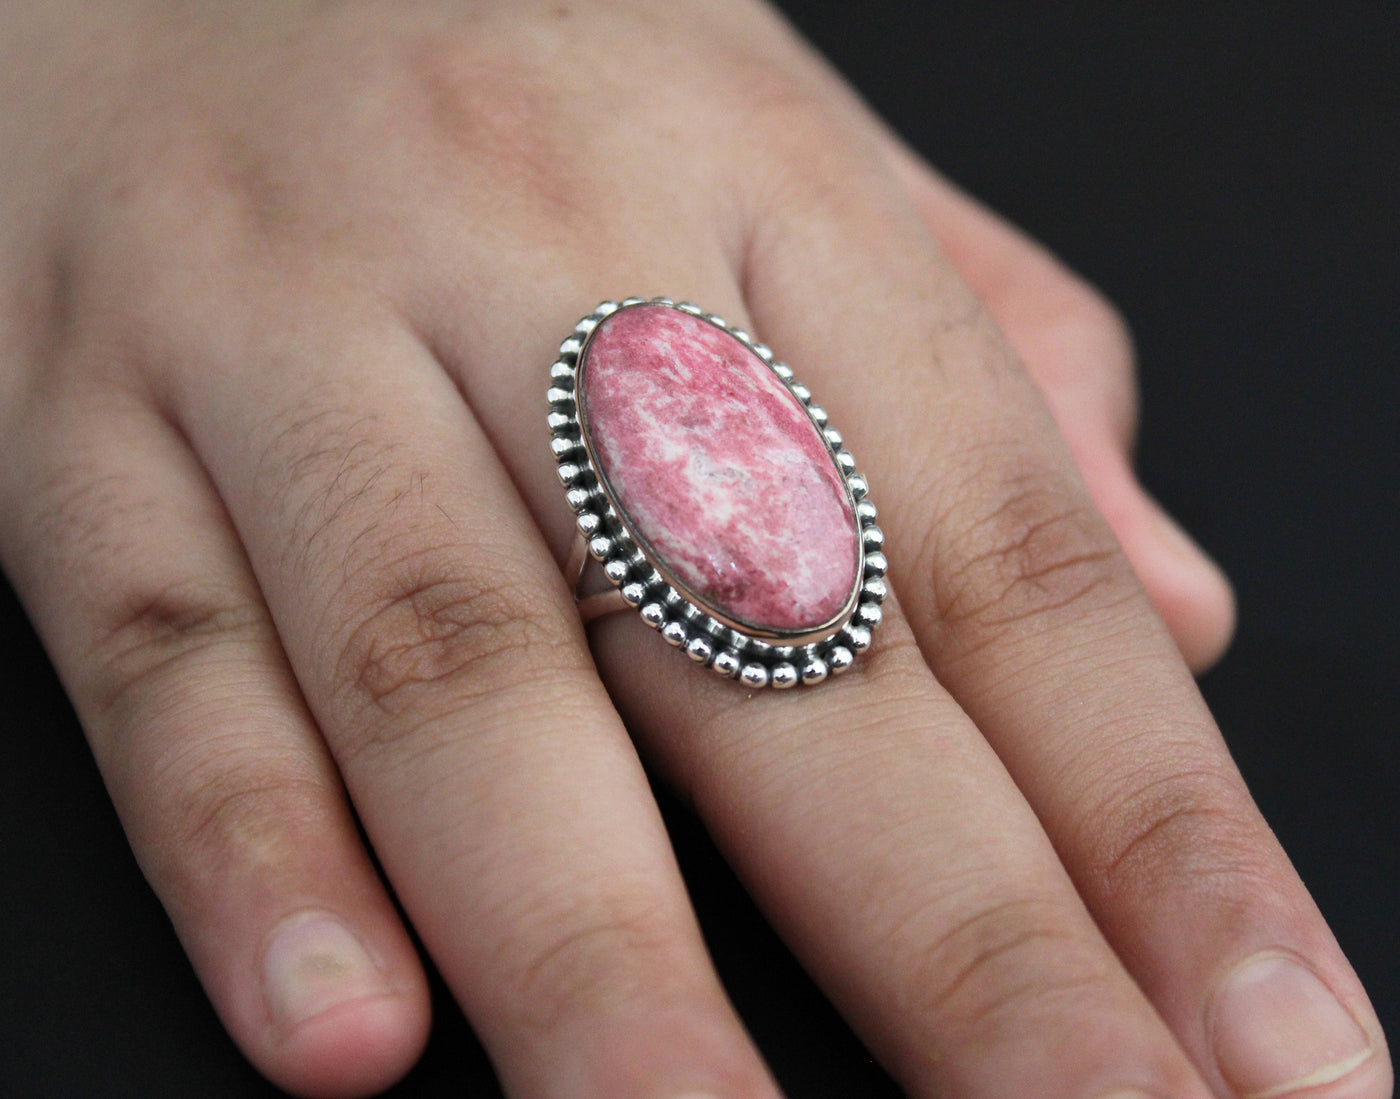 Agate Statement Ring, Pink Agate Ring, 925 Sterling Silver Ring, Handmade Ring, Unique Silver Rings, Large Silver rings, Healing Crystals